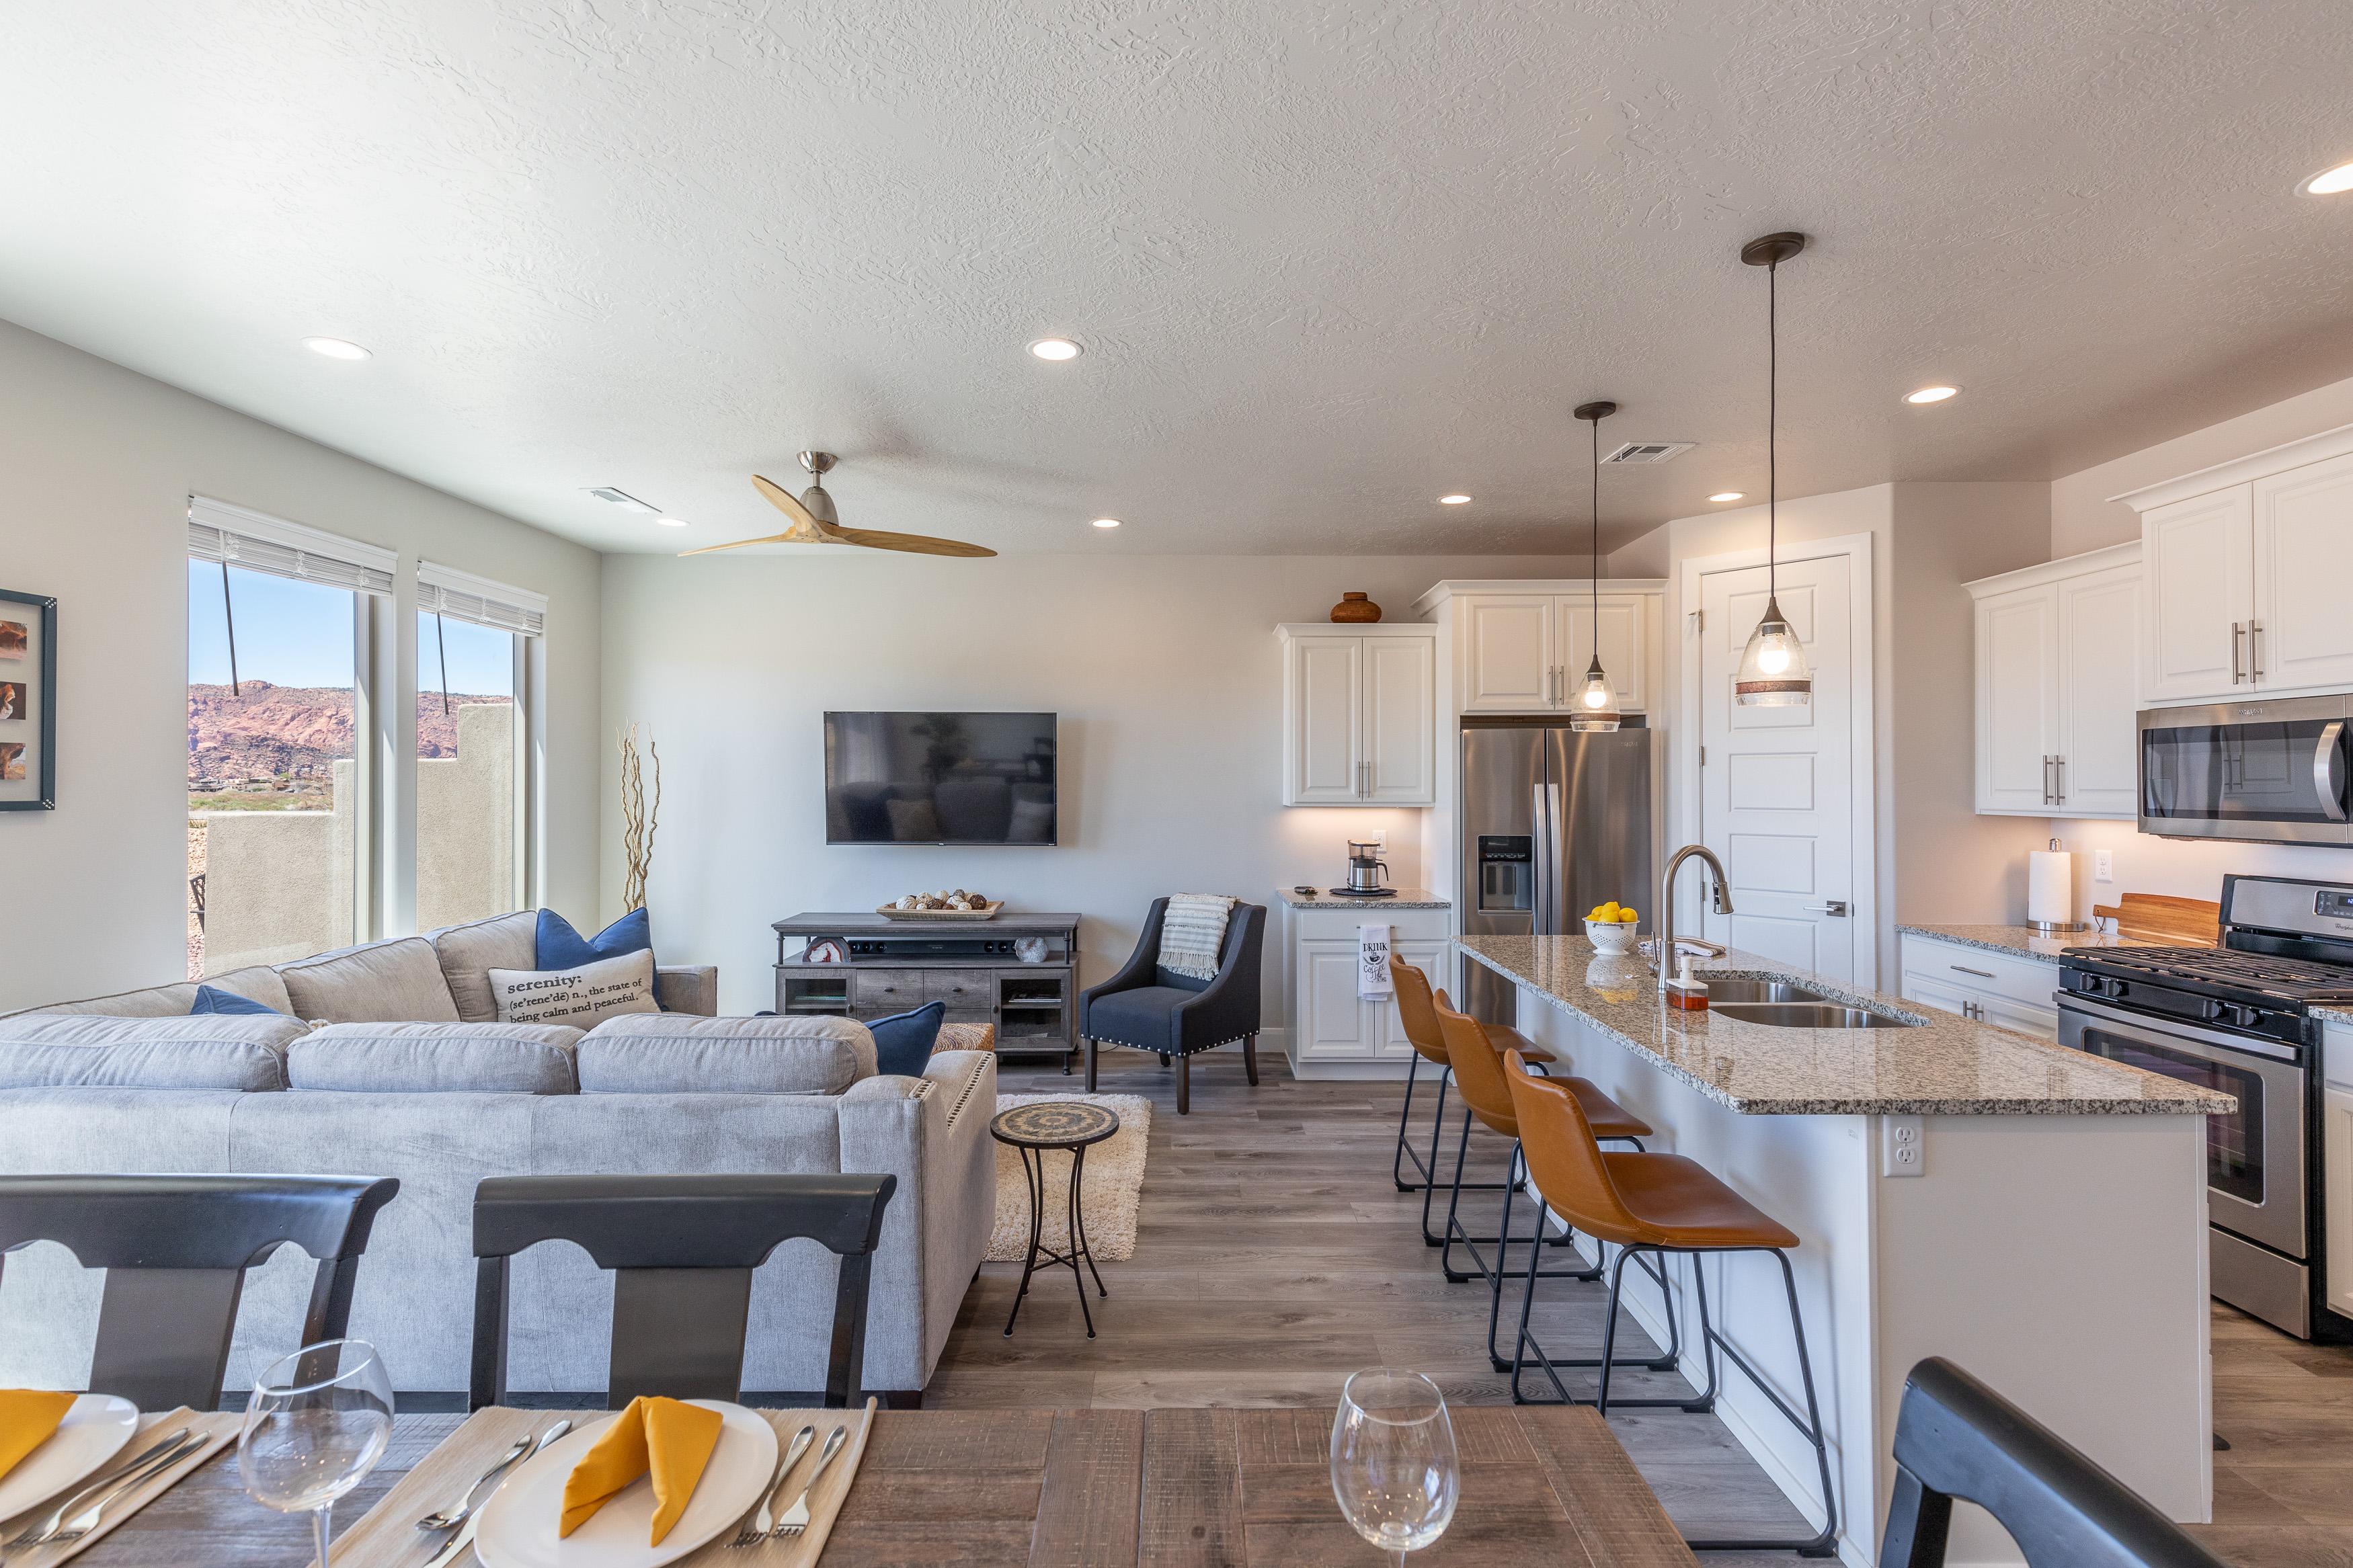 The living room is designed as an open floor plan and is a great gathering place for meals, games, or watching TV during your stay. Notice the view from this room!